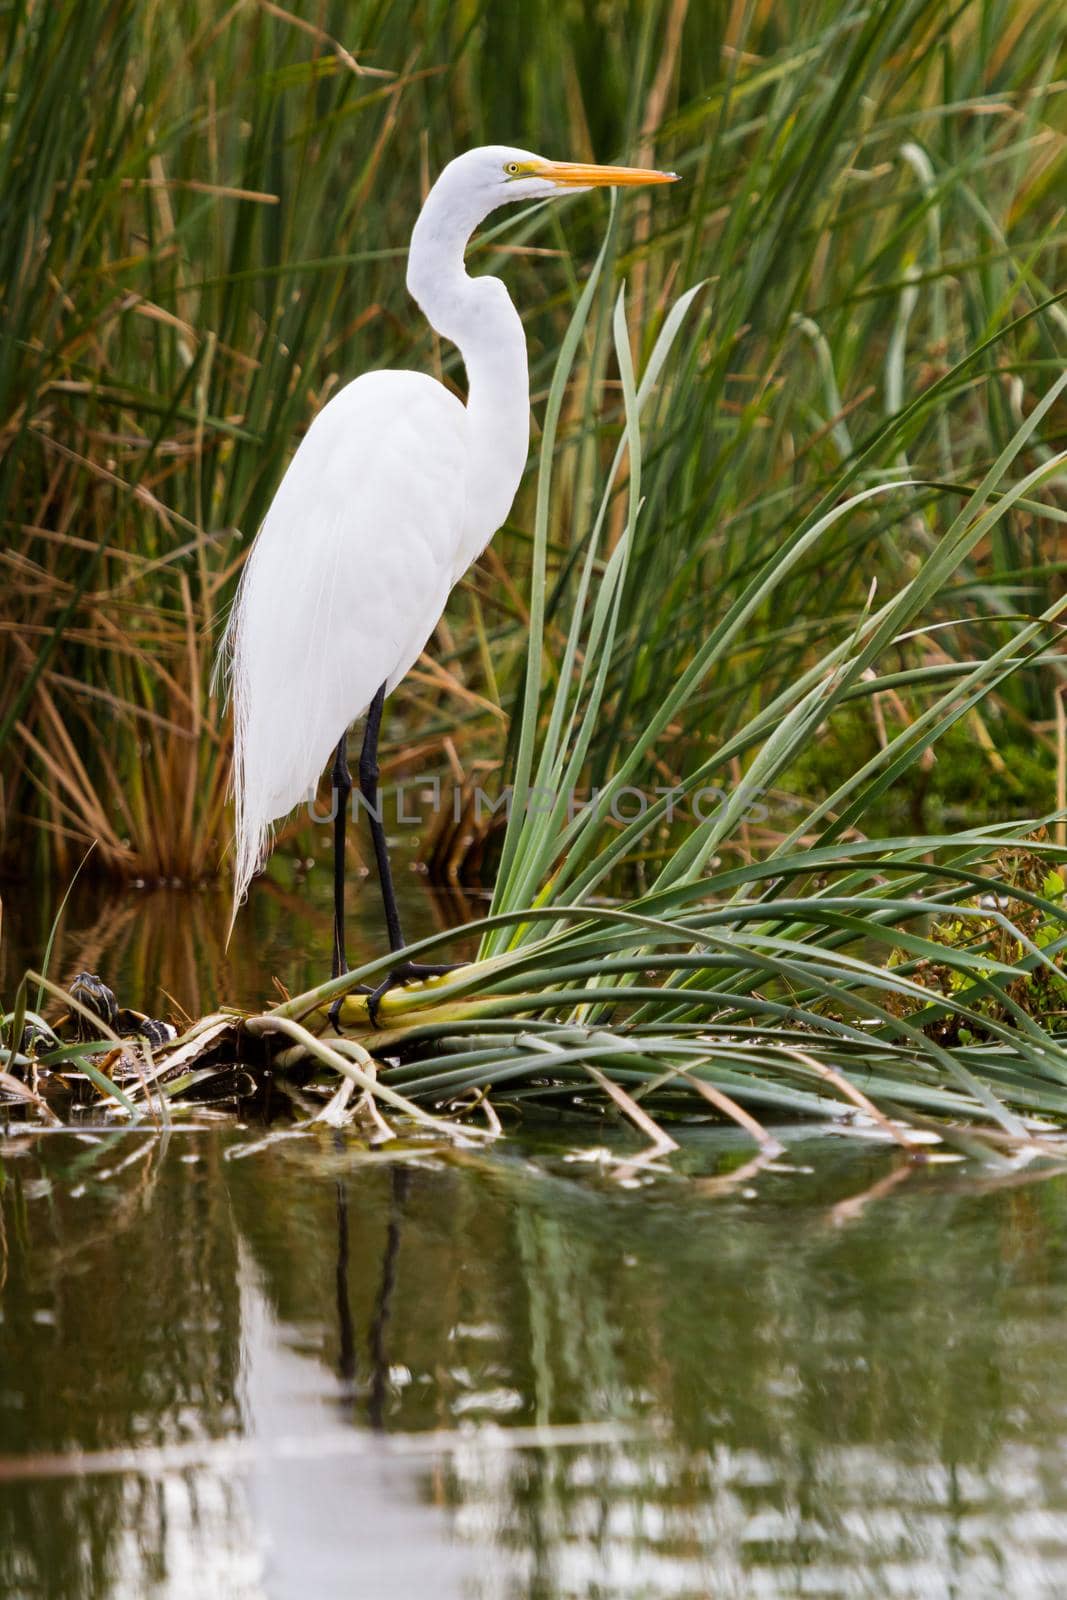 Snowy egret in natural habitat on South Padre Island, TX.